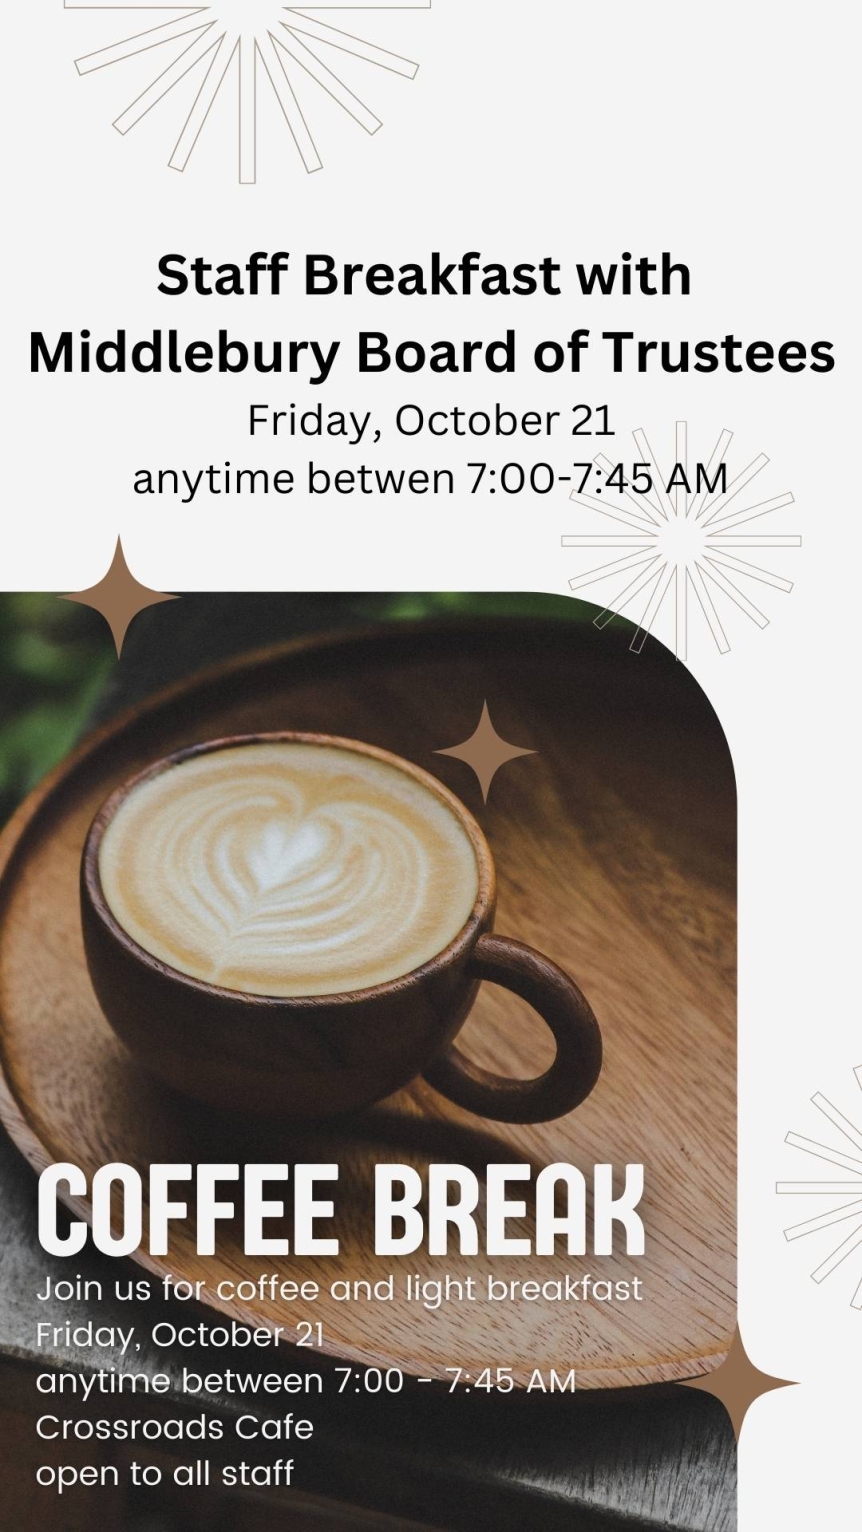 Staff Breakfast with Middlebury Board of Trustees